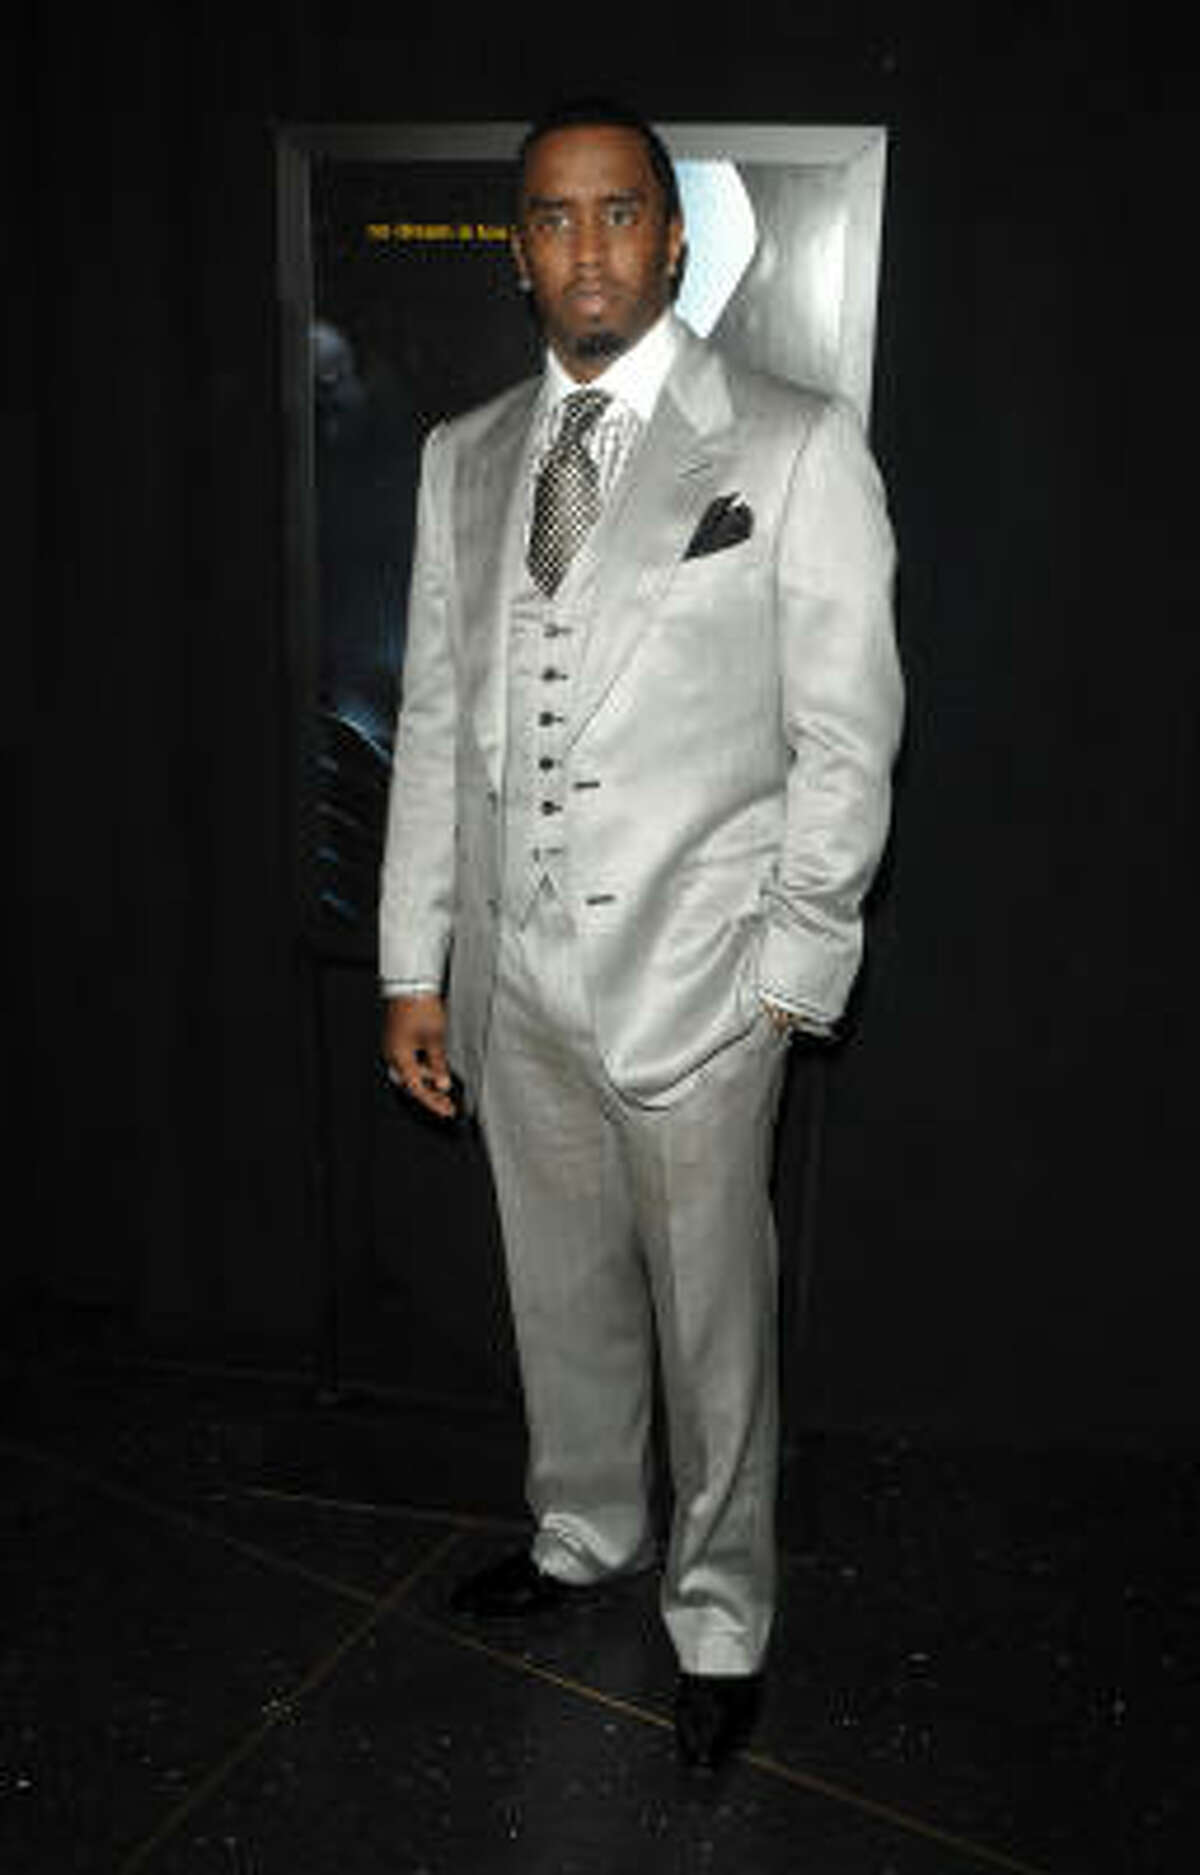 It’s clean-cut all the way for Sean “Diddy” Combs at the recent premiere for Notorious in New York.